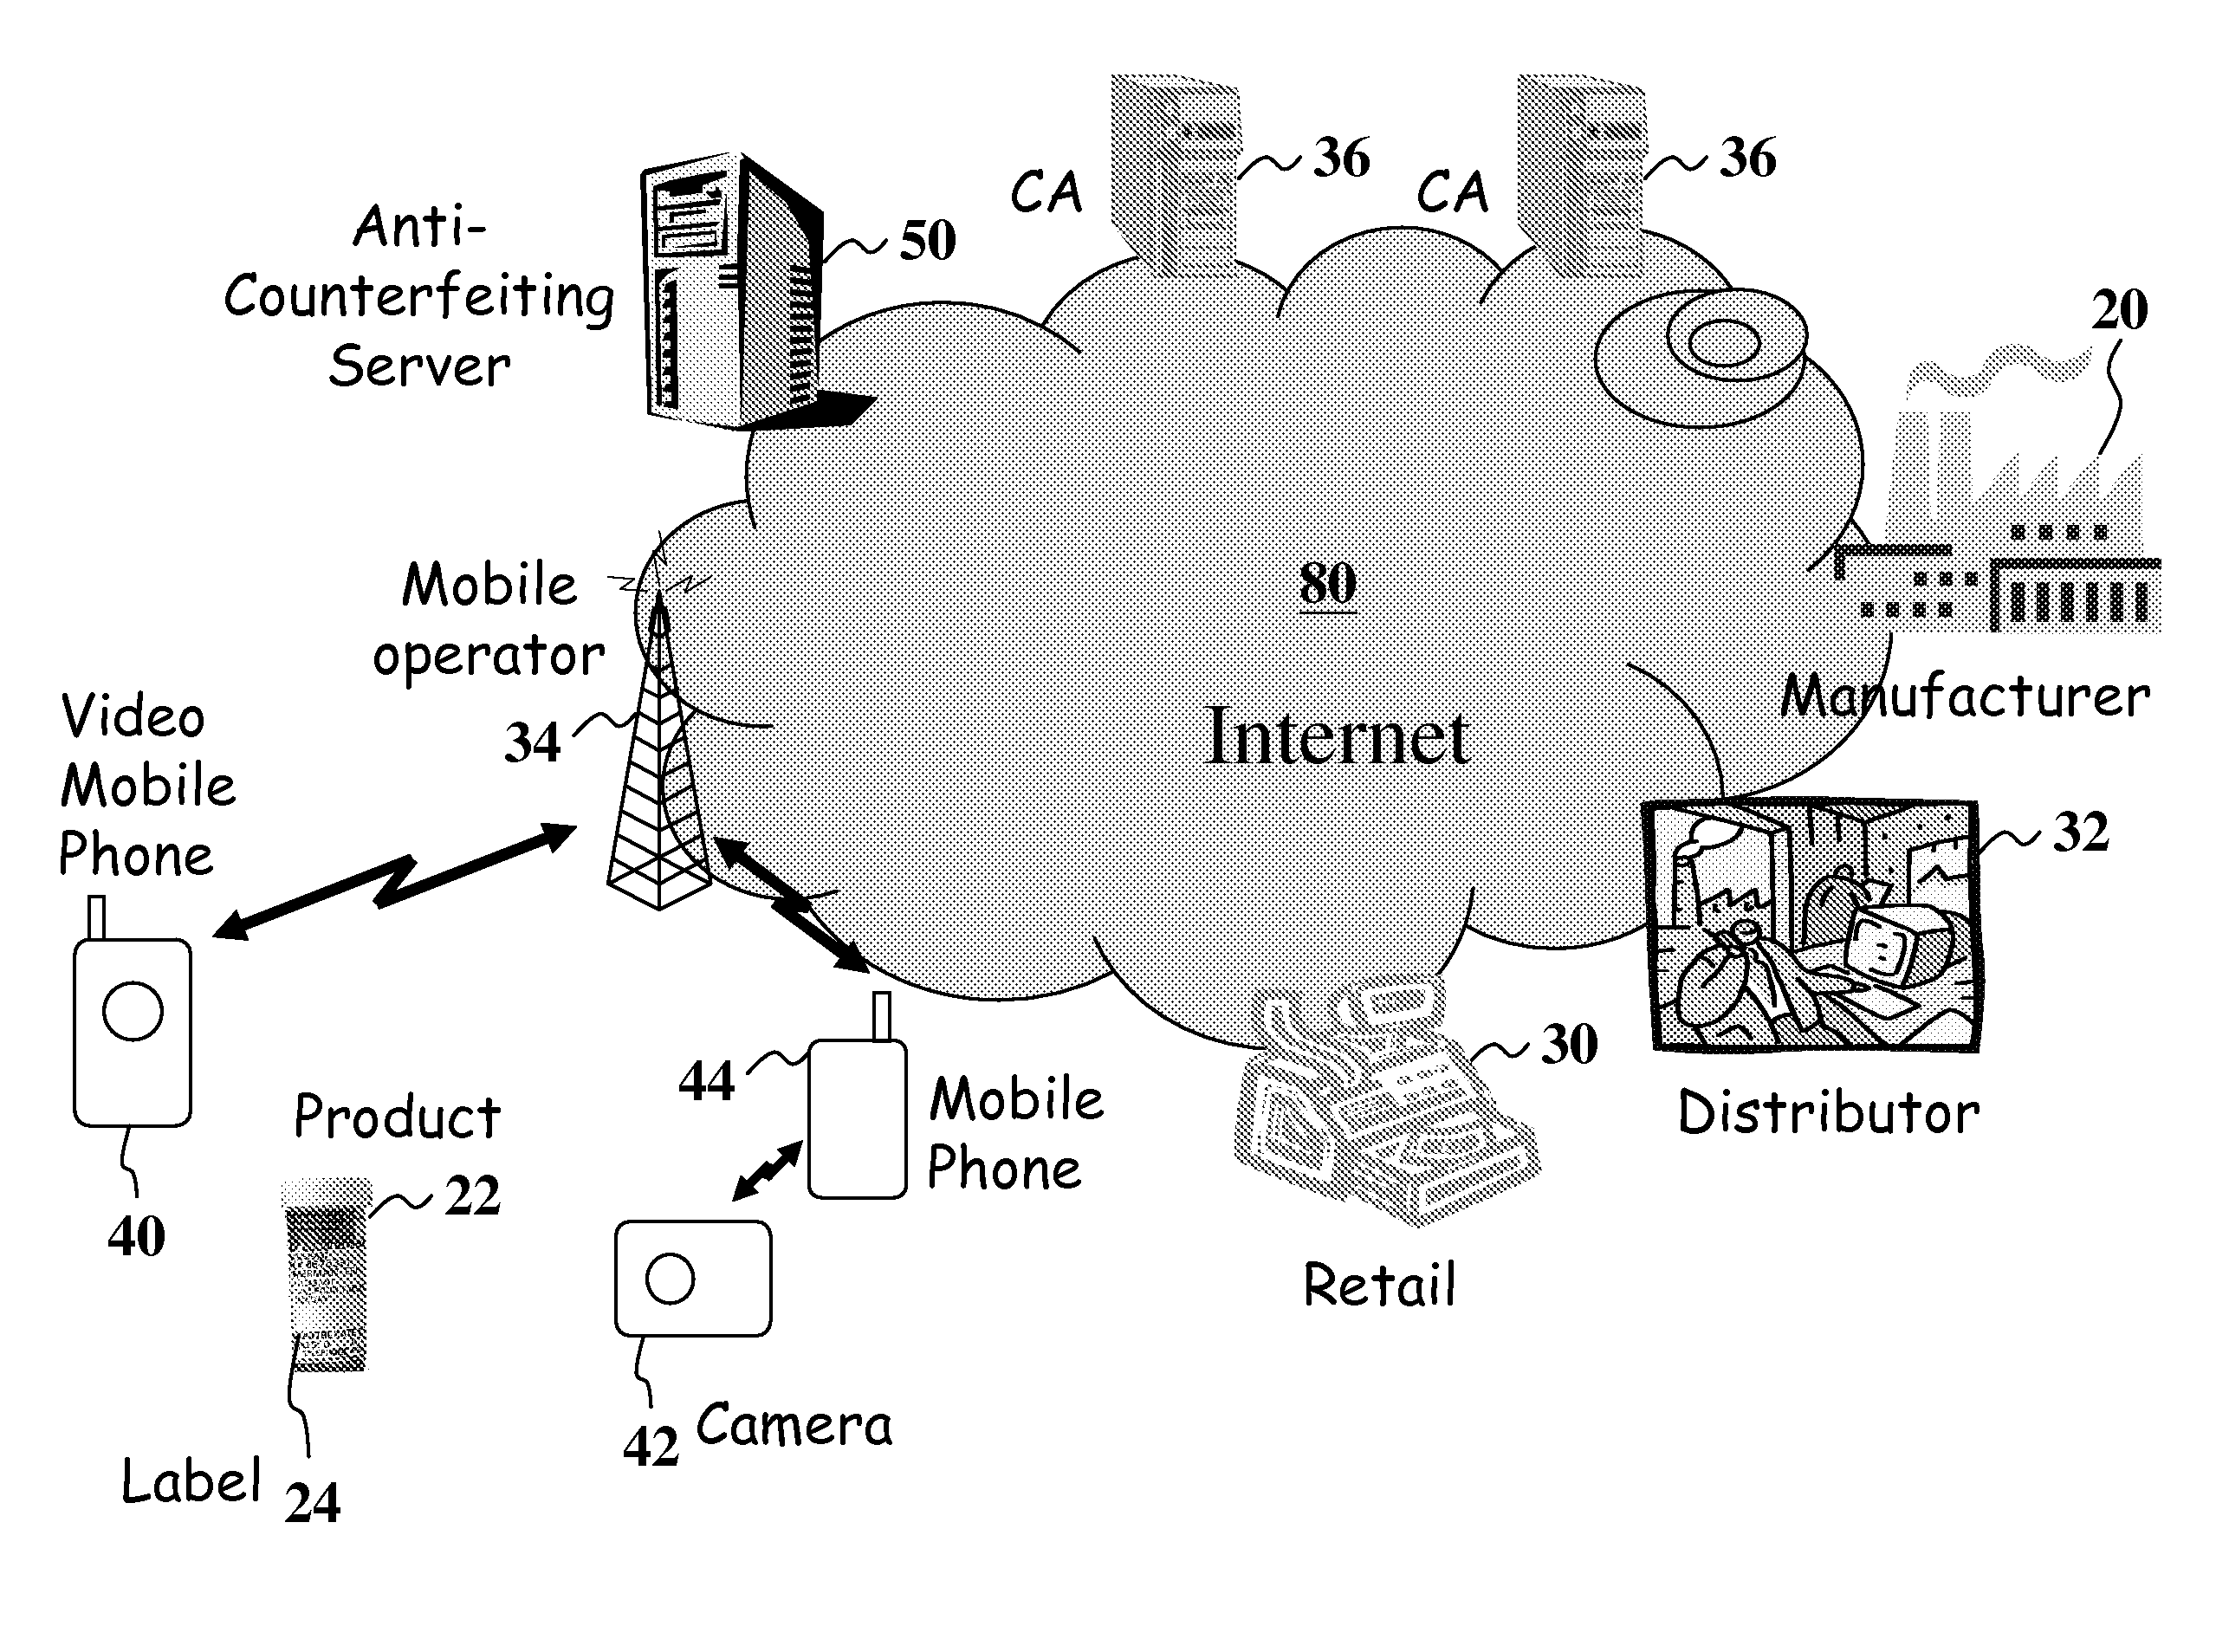 System for detecting couterfeiting products using camera